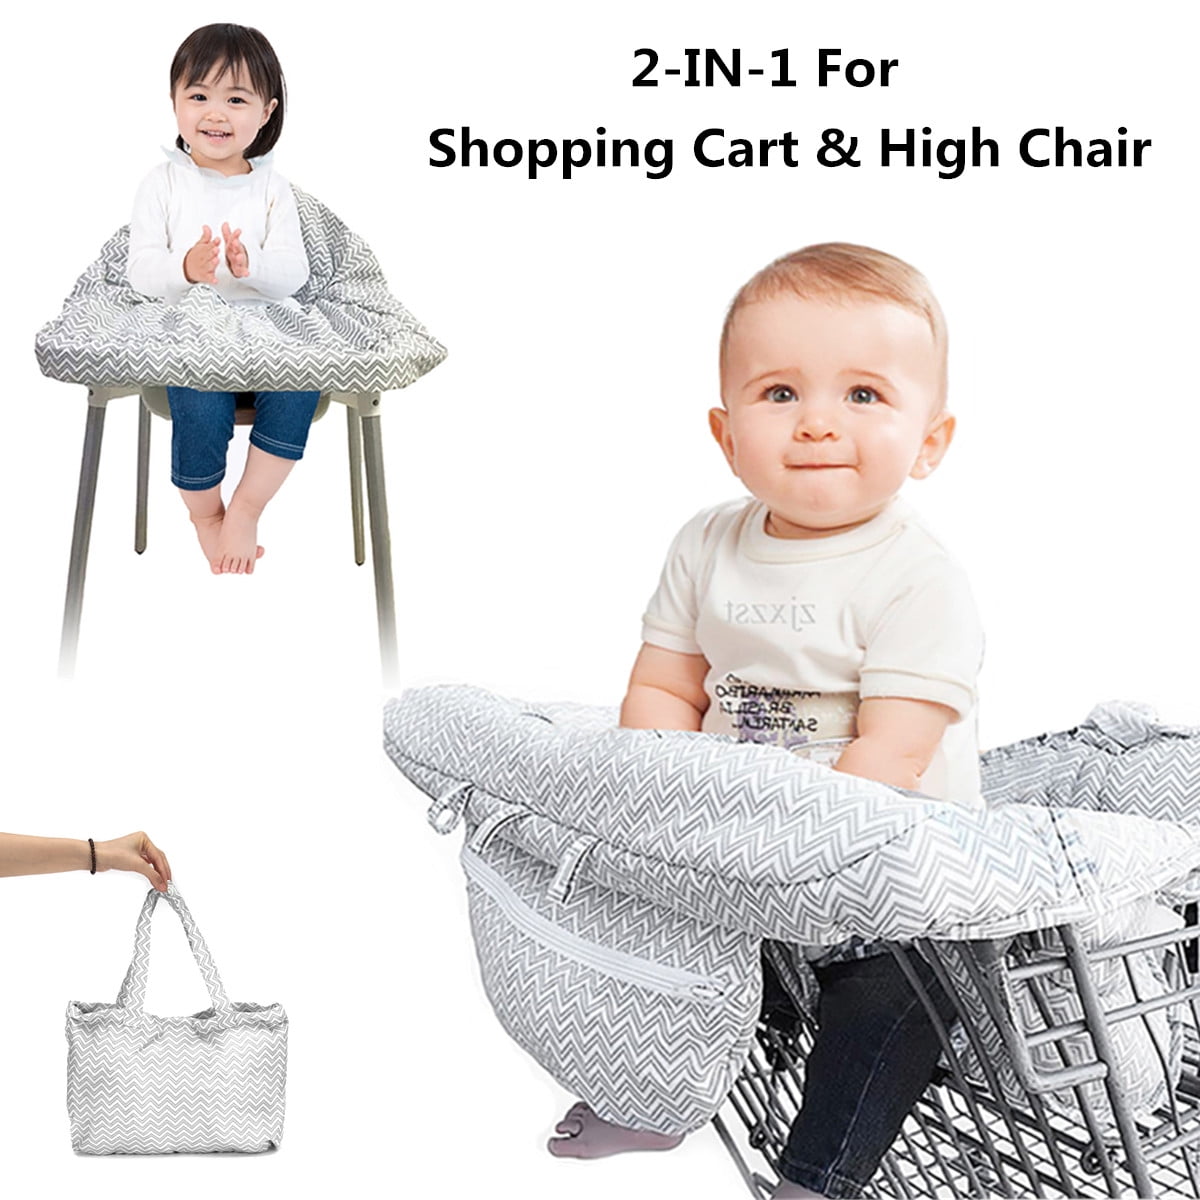 12 2in1 Baby Shopping Cart Covers Fits Highchairs and Shopping Cart Seats Includes Free Carry Bag Shopping Cart Cover,High Chair and Grocery Cart Cover for Babies Infants & Toddlers Kids 